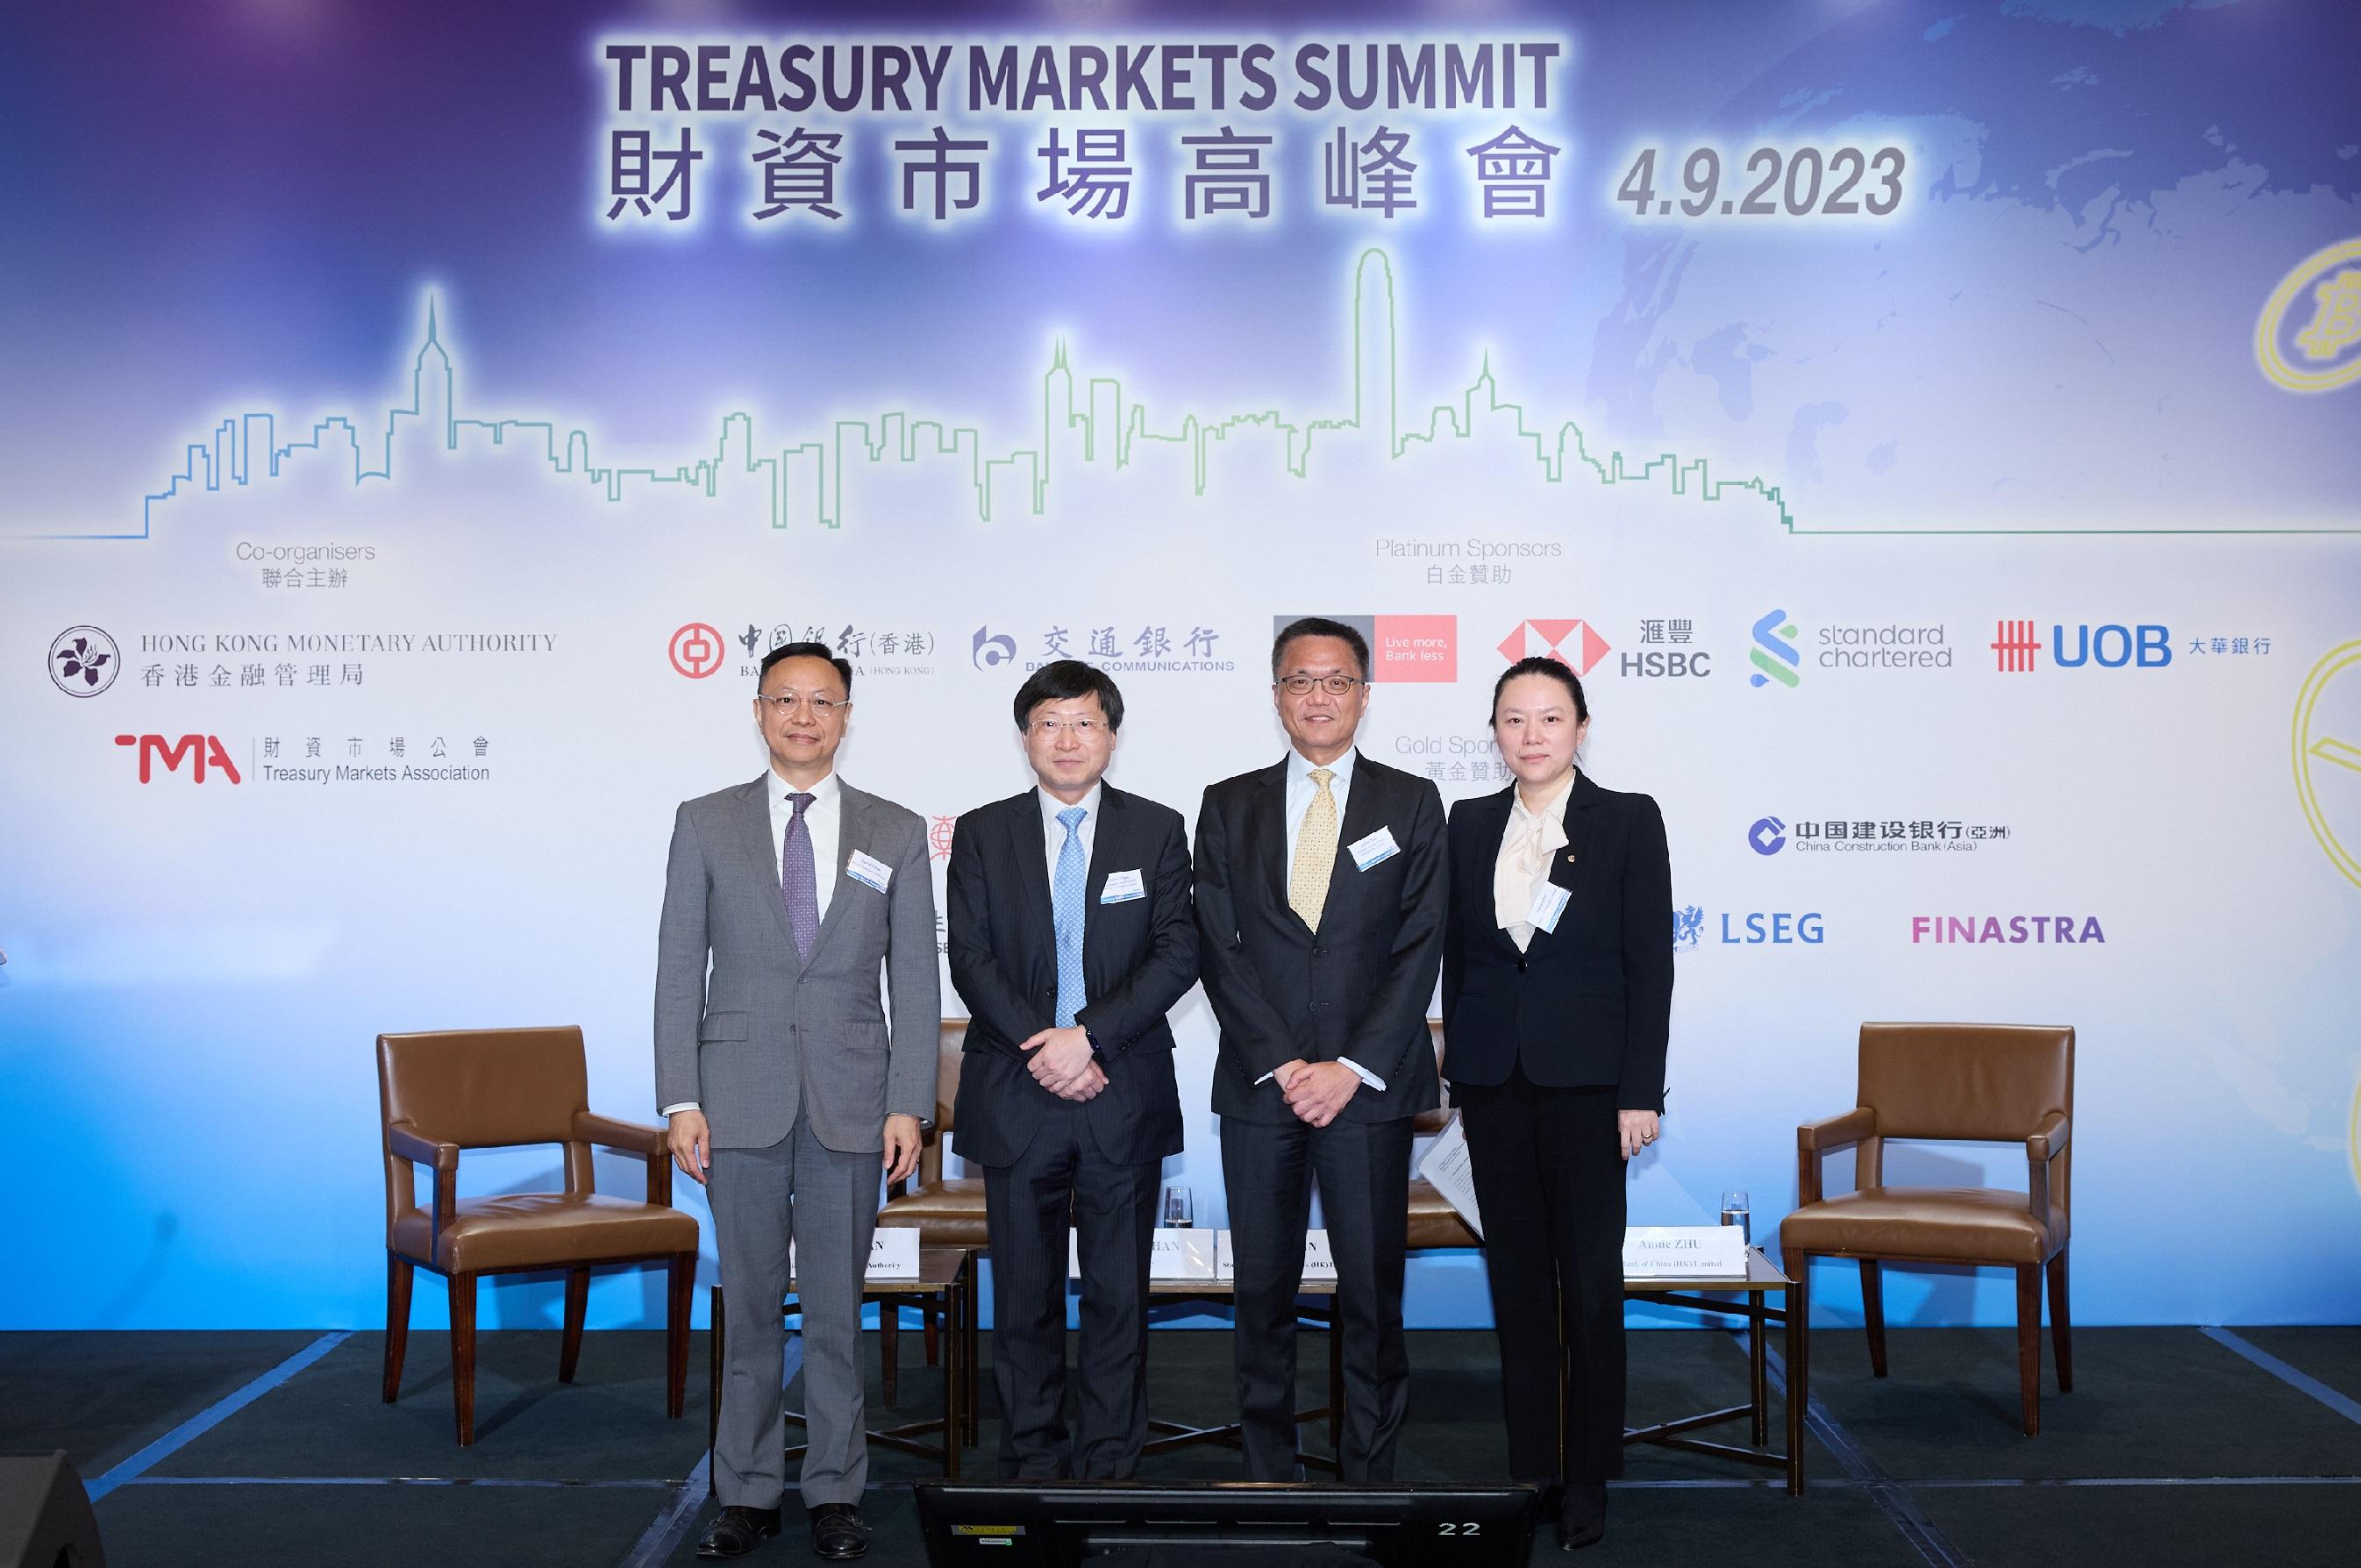 The Treasury Markets Summit 2023 was held today (September 4) in Hong Kong. Photo shows Deputy Chief Executive of the Hong Kong Monetary Authority and the Chair of the Treasury Markets Association Executive Board, Mr Darryl Chan (first left) who shared his views on offshore Renminbi development opportunities today. Joining him on the panel discussion are Advisor to Co-Chief Executives, the Hongkong and Shanghai Banking Corporation Limited Mr Justin Chan (second left); Managing Director and the Financial Markets Head, Asia, Standard Chartered Bank (Hong Kong) Limited, Mr John Tan (second right); and Deputy Head of Renminbi Business and the General Manager, Global Markets, Bank of China (Hong Kong) Limited, Ms Annie Zhu (first right). 